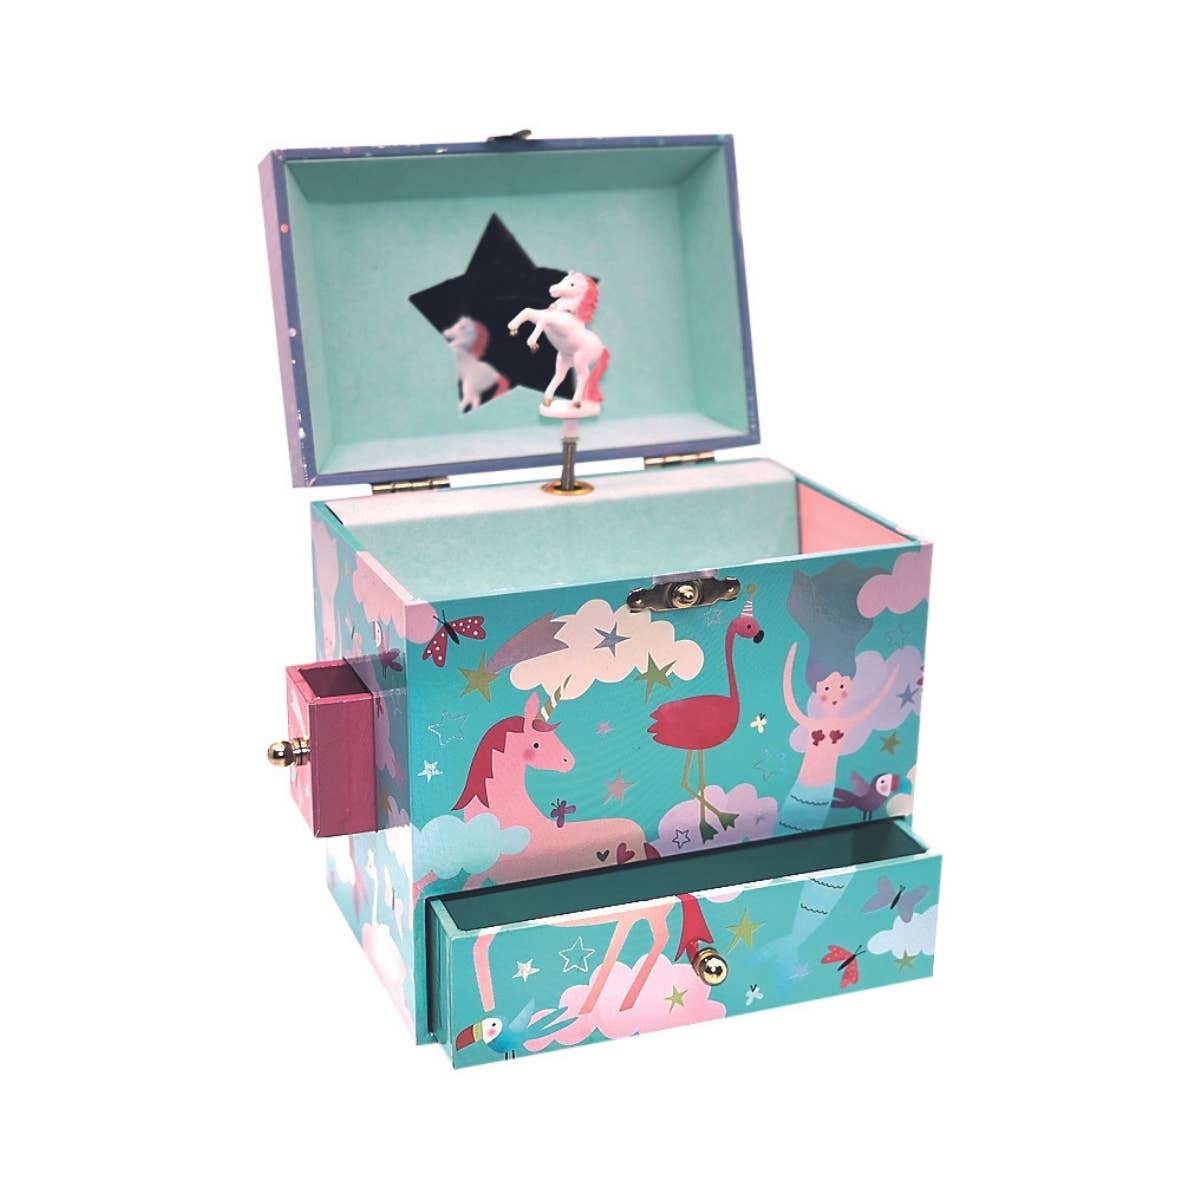 Floss & Rock fantasy musical jewelry box with 3 drawers